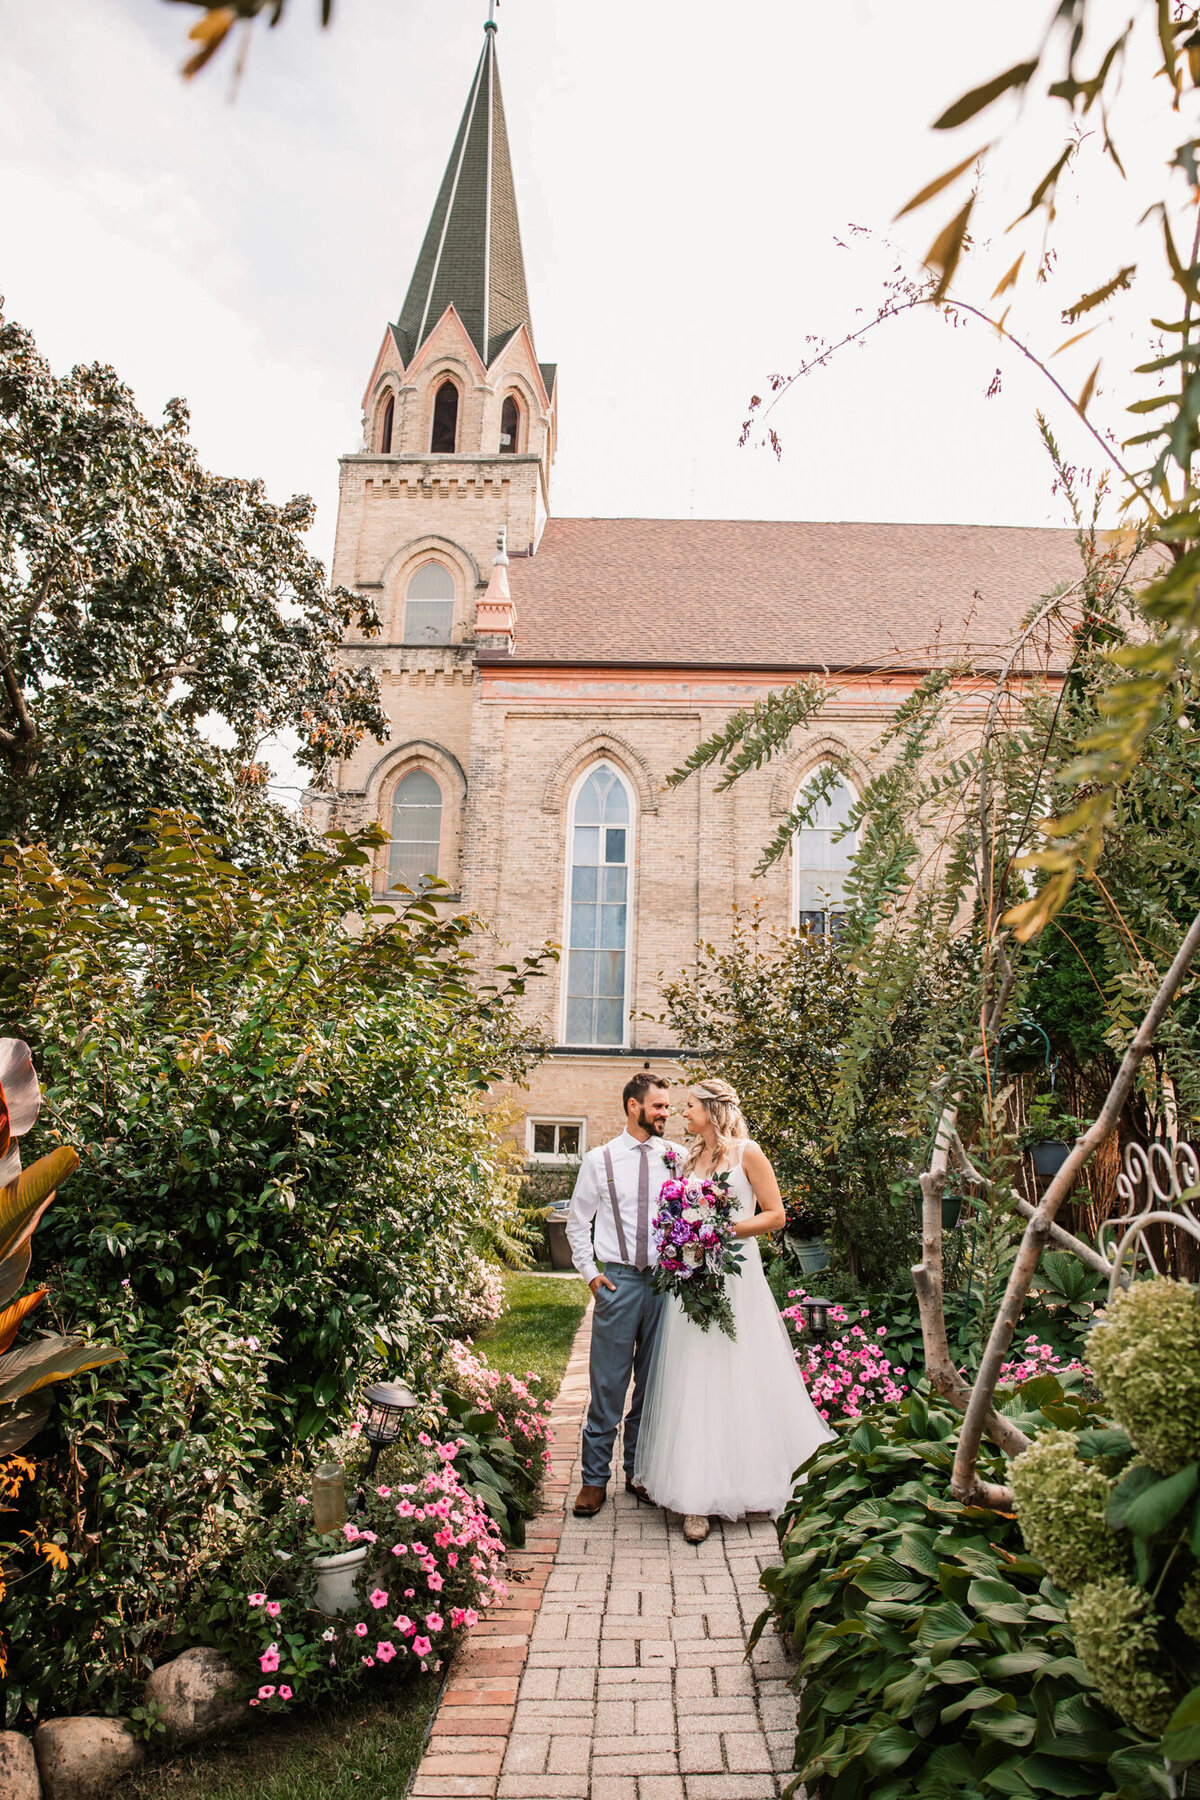 bride and groom stand on brick path in front of a church surrounded by lush gardens